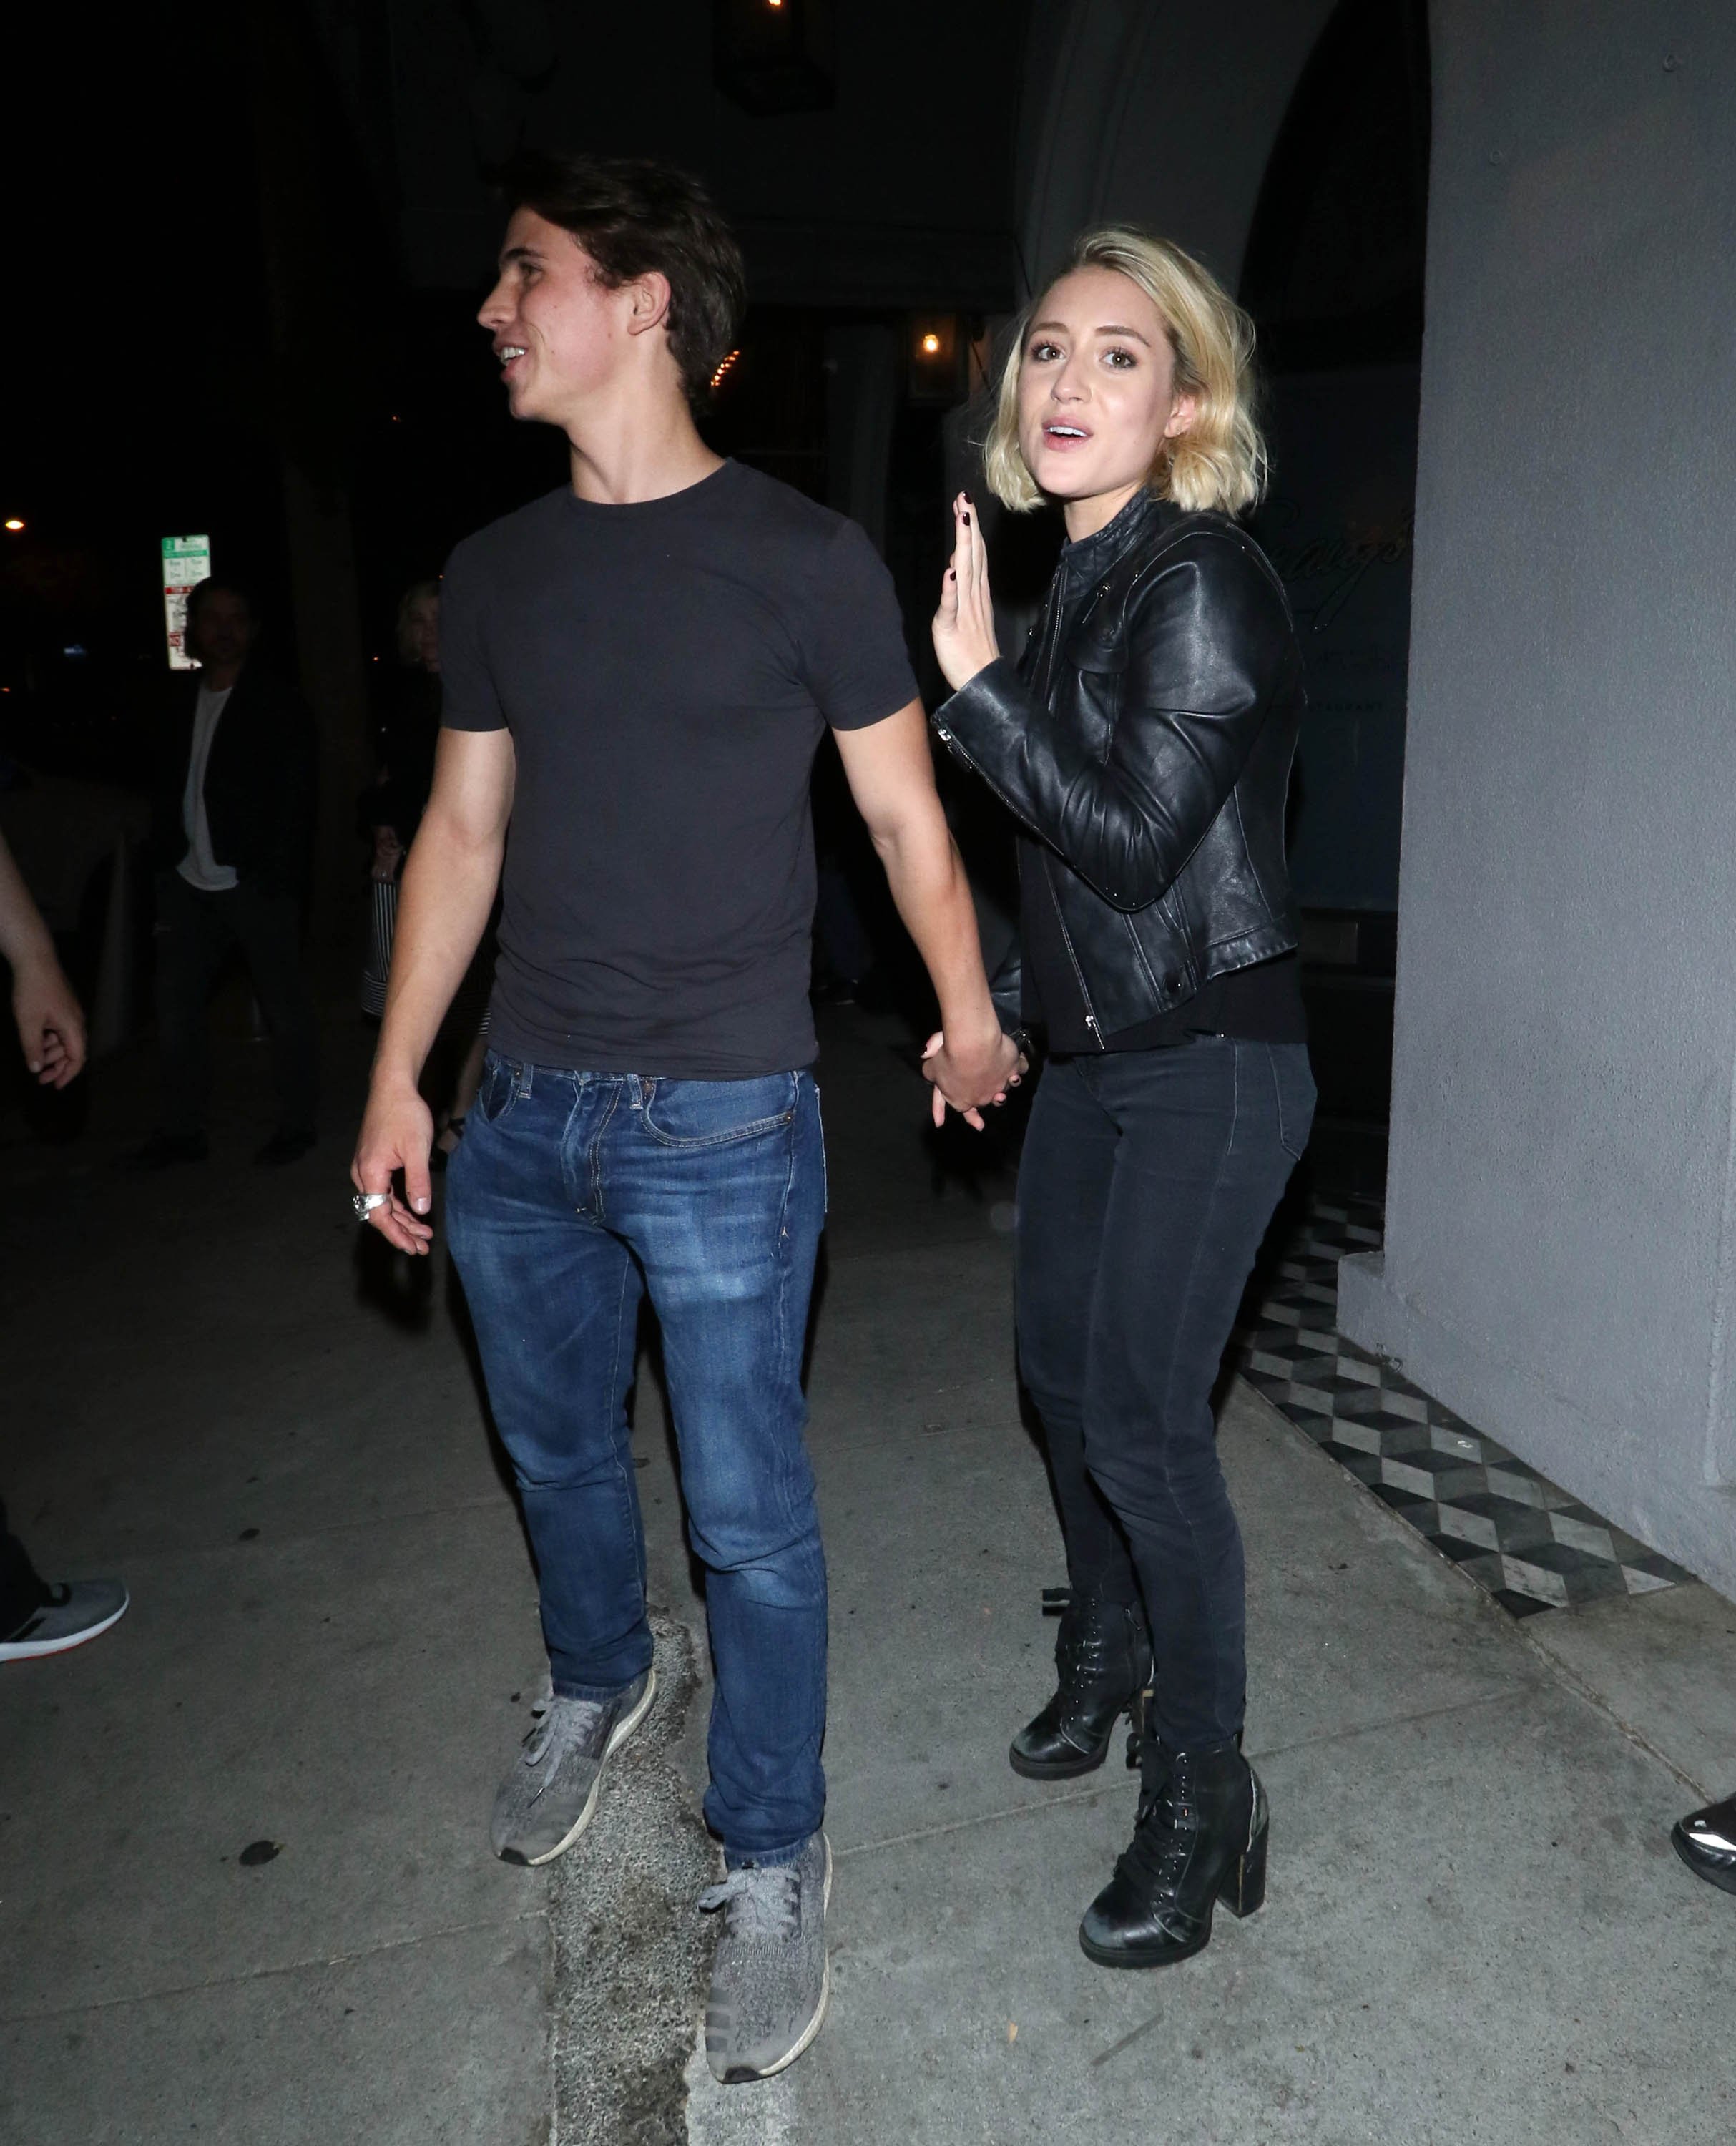 Tanner Buchanan and Lizzie Broadway in June 2019 in Los Angeles, California. | Source: Getty Images